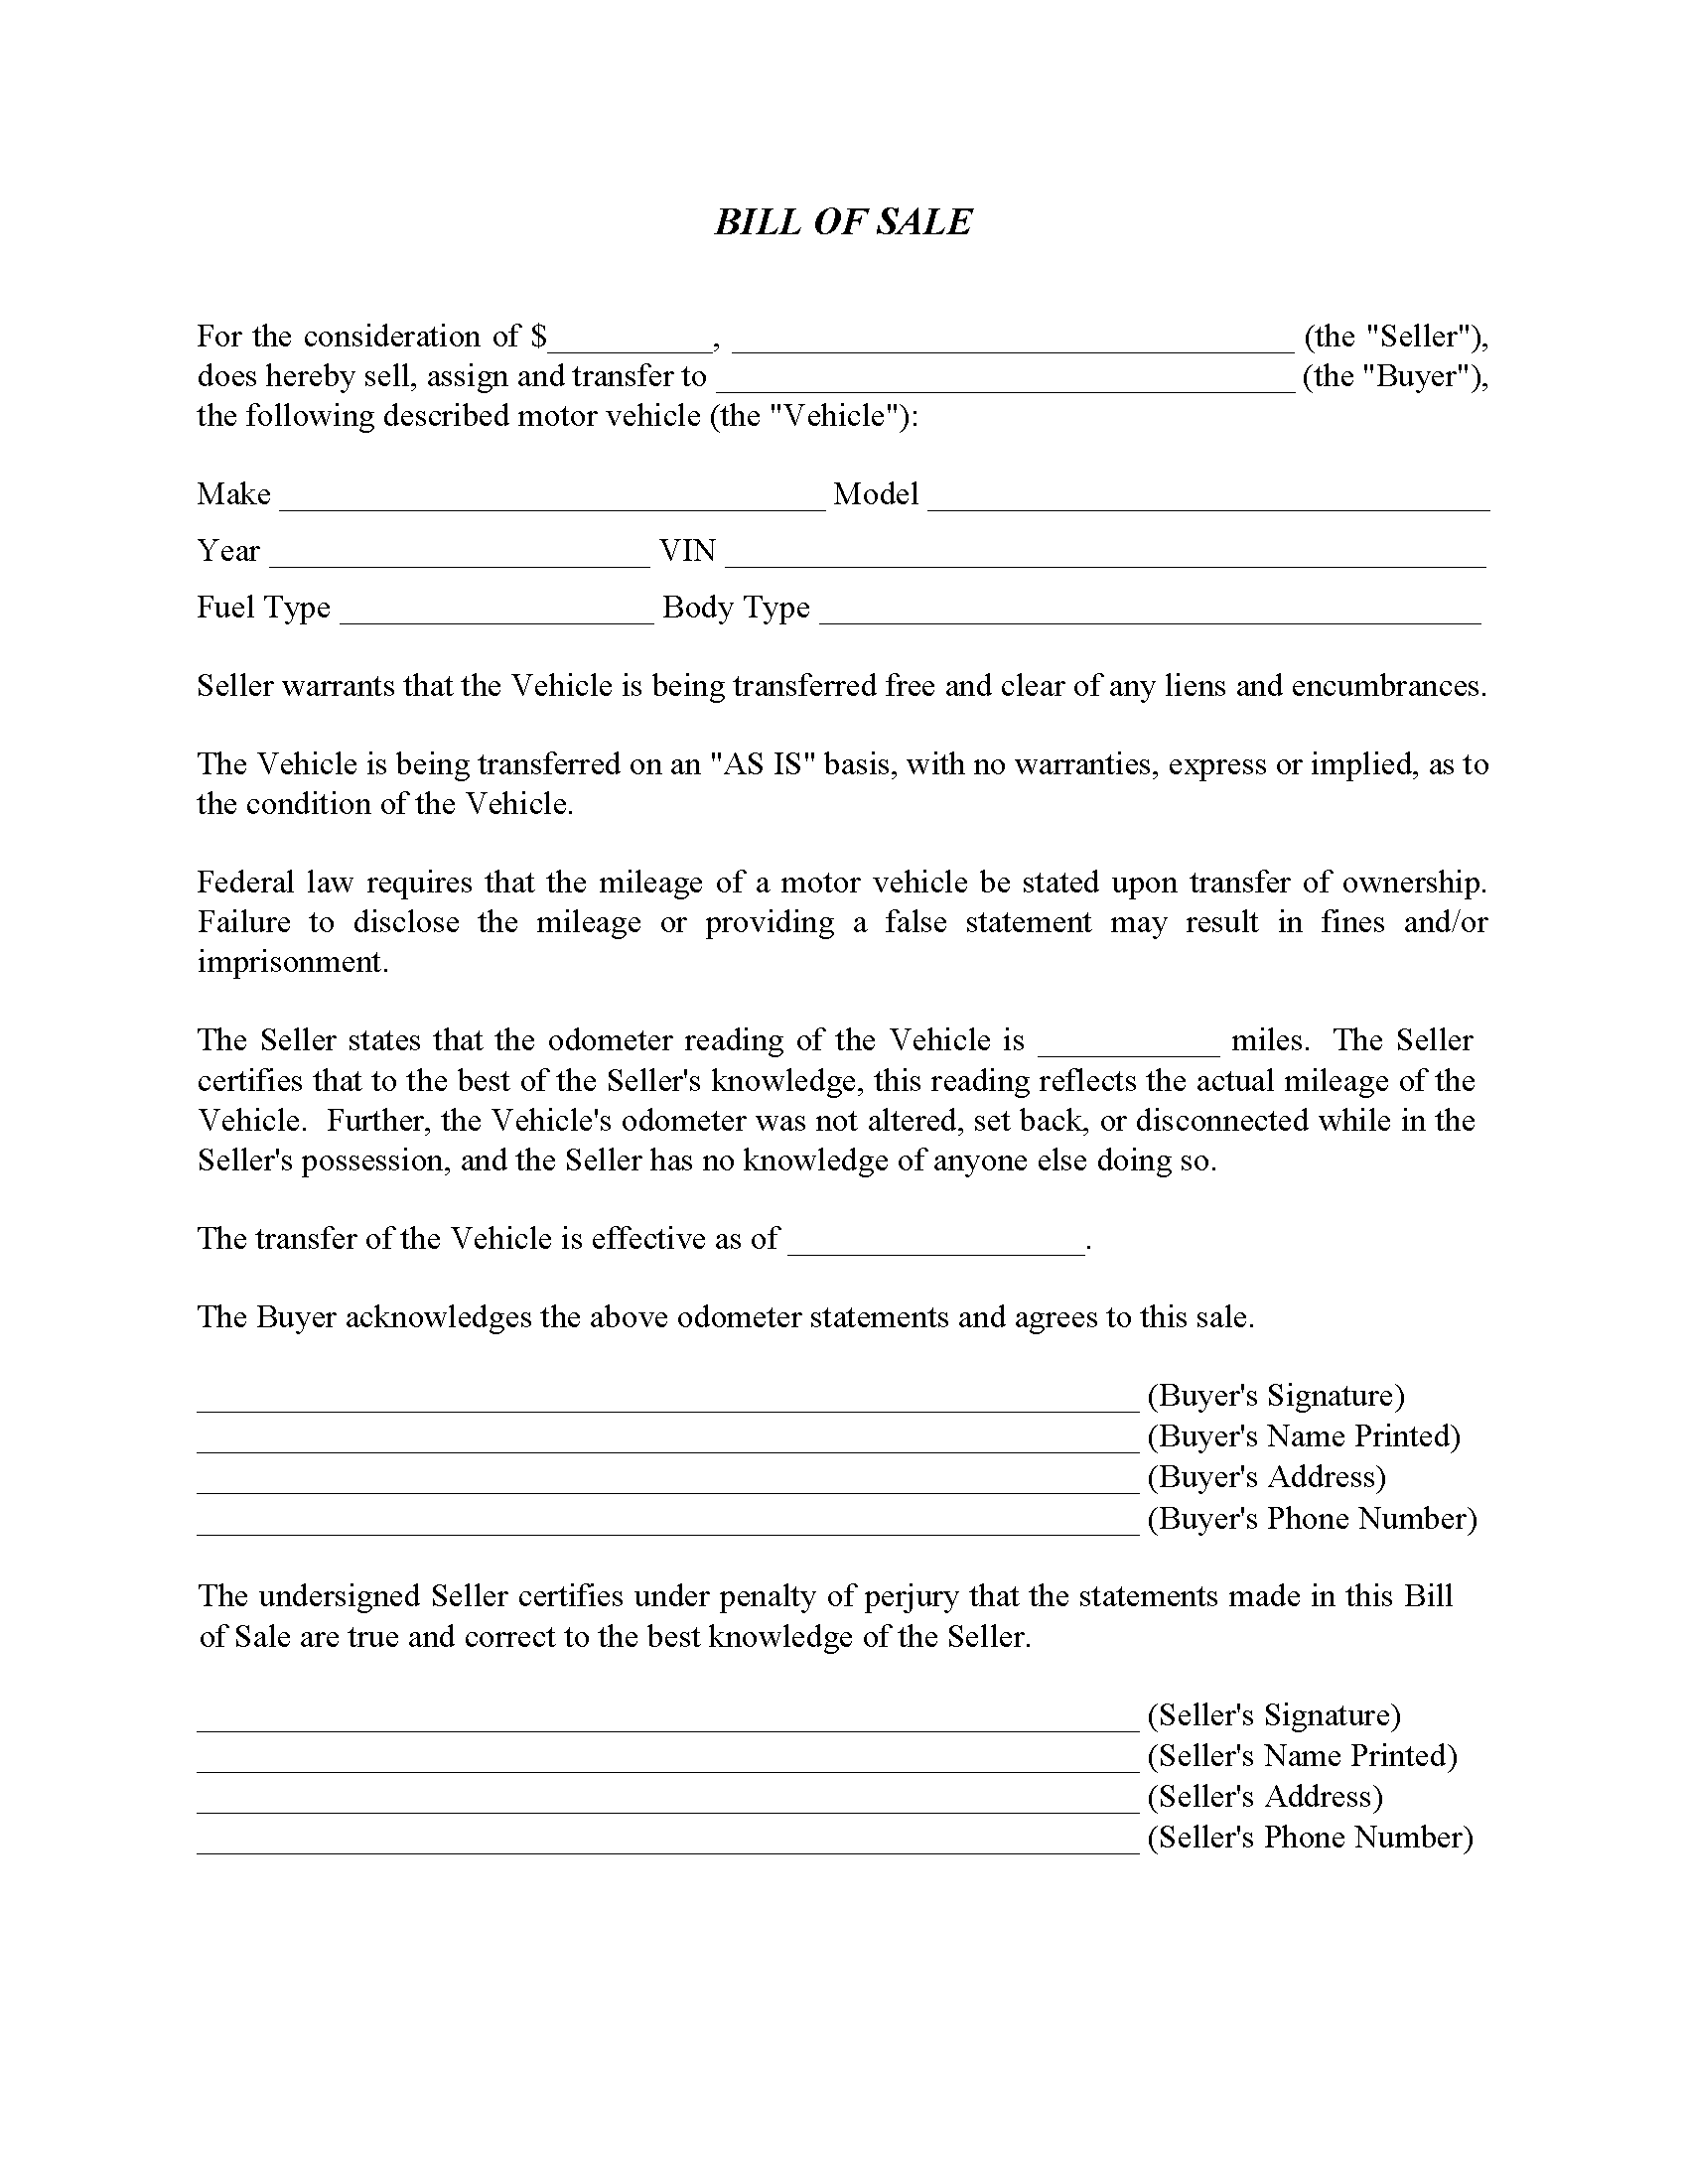 Arkansas Motor Vehicle Bill of Sale Form - Free Printable Legal Forms